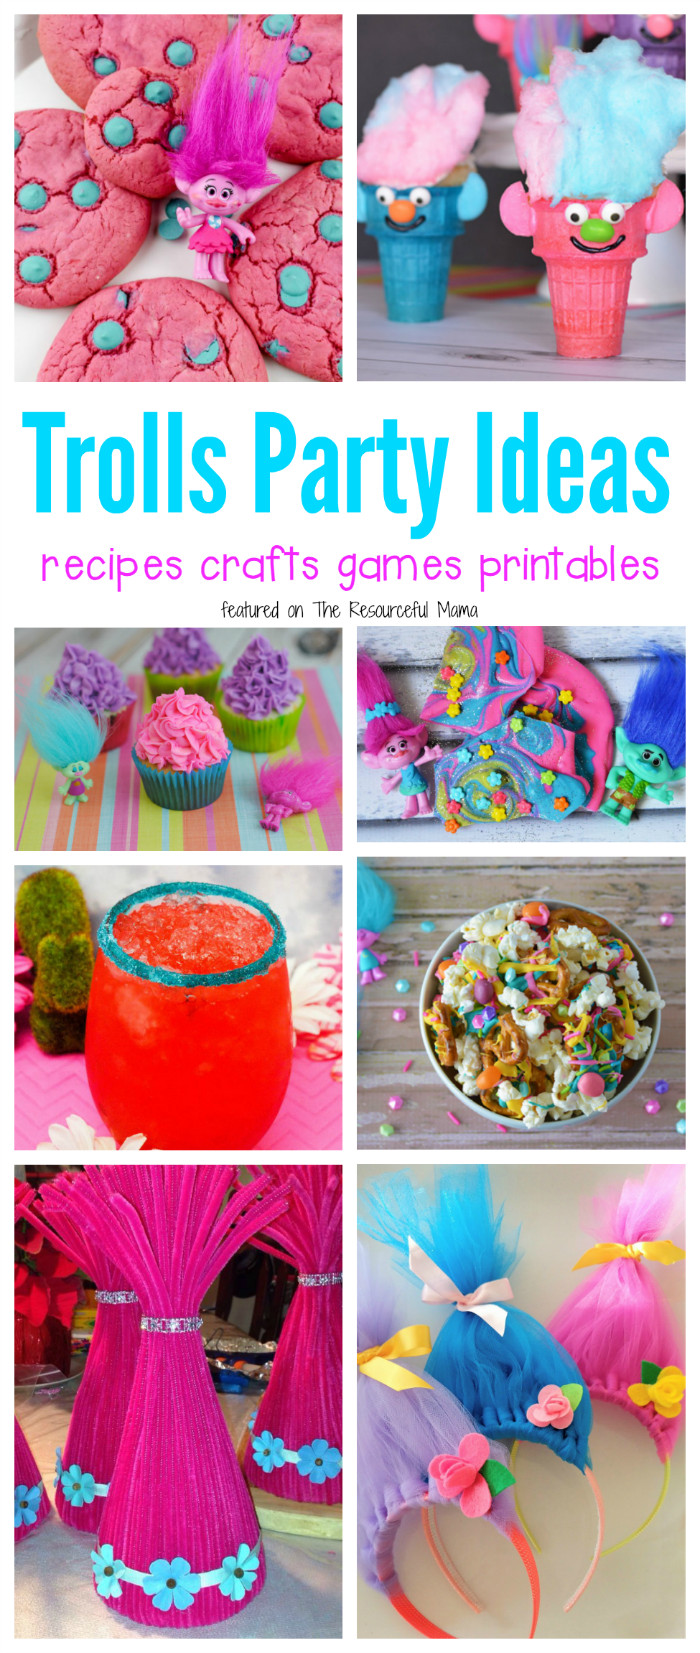 Trolls Pool Birthday Party Ideas
 Pin on The Resourceful Mama